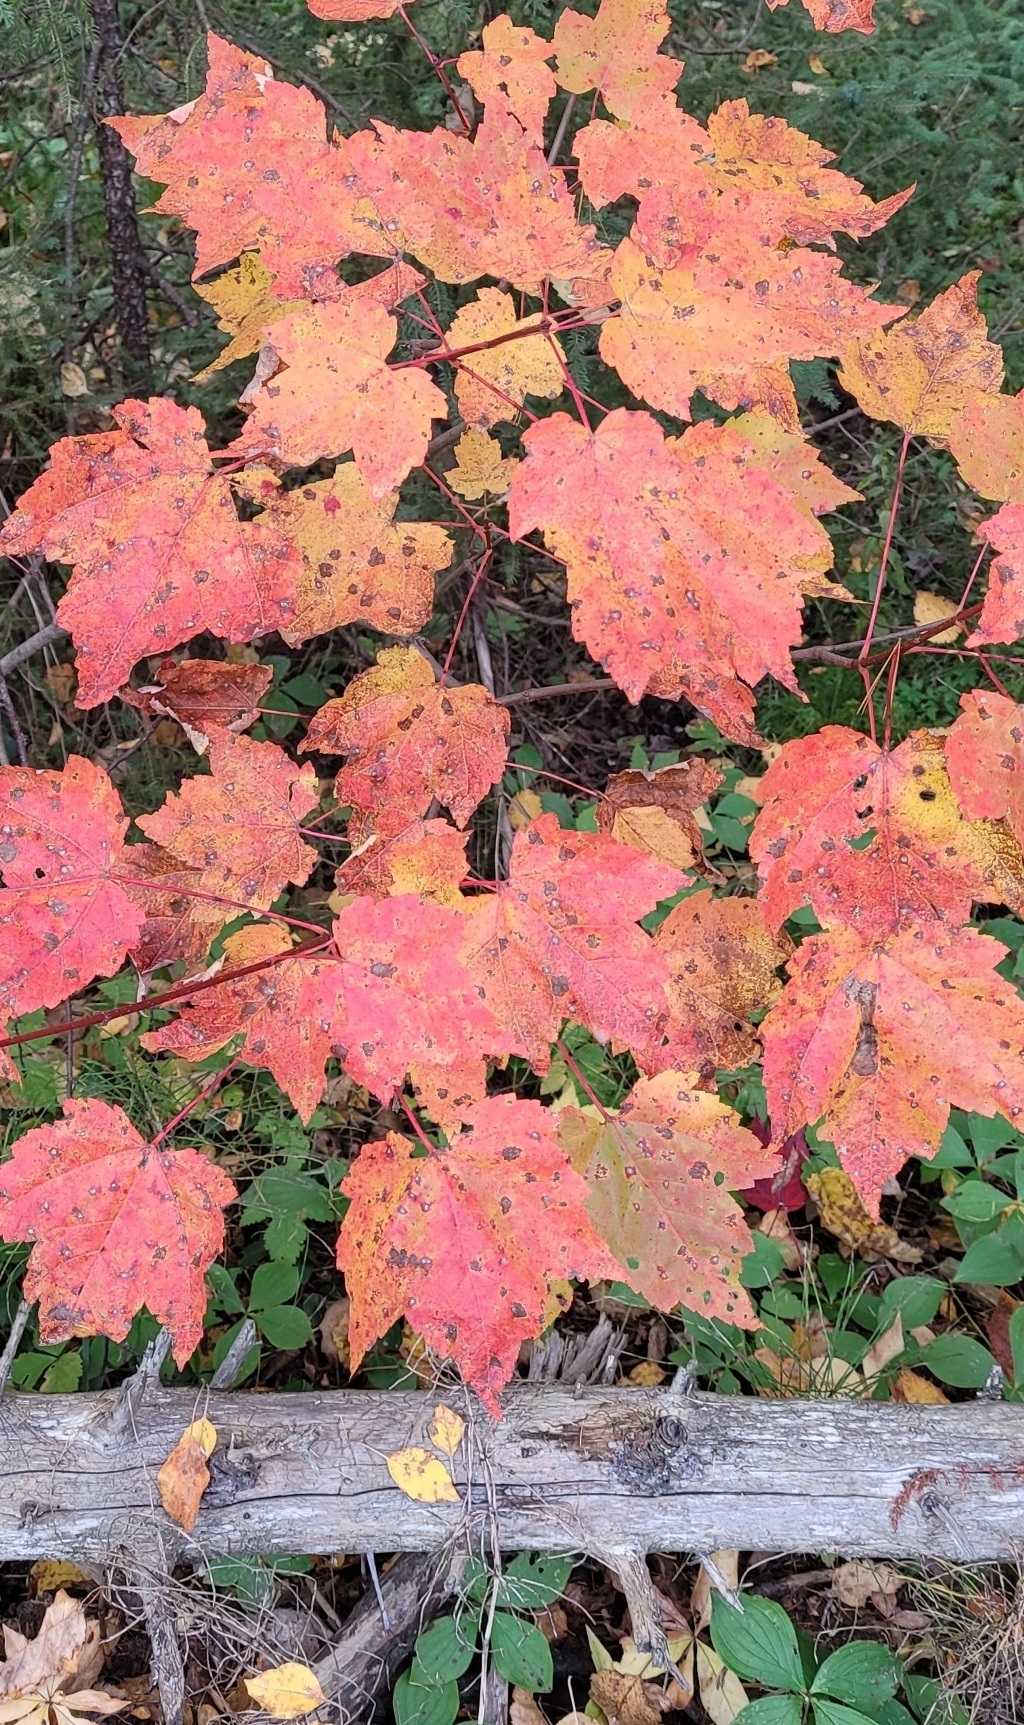 Brightly colored red maple leaves contrast against a dark green background. The maple leaves are pink, yellow, orange, and red.